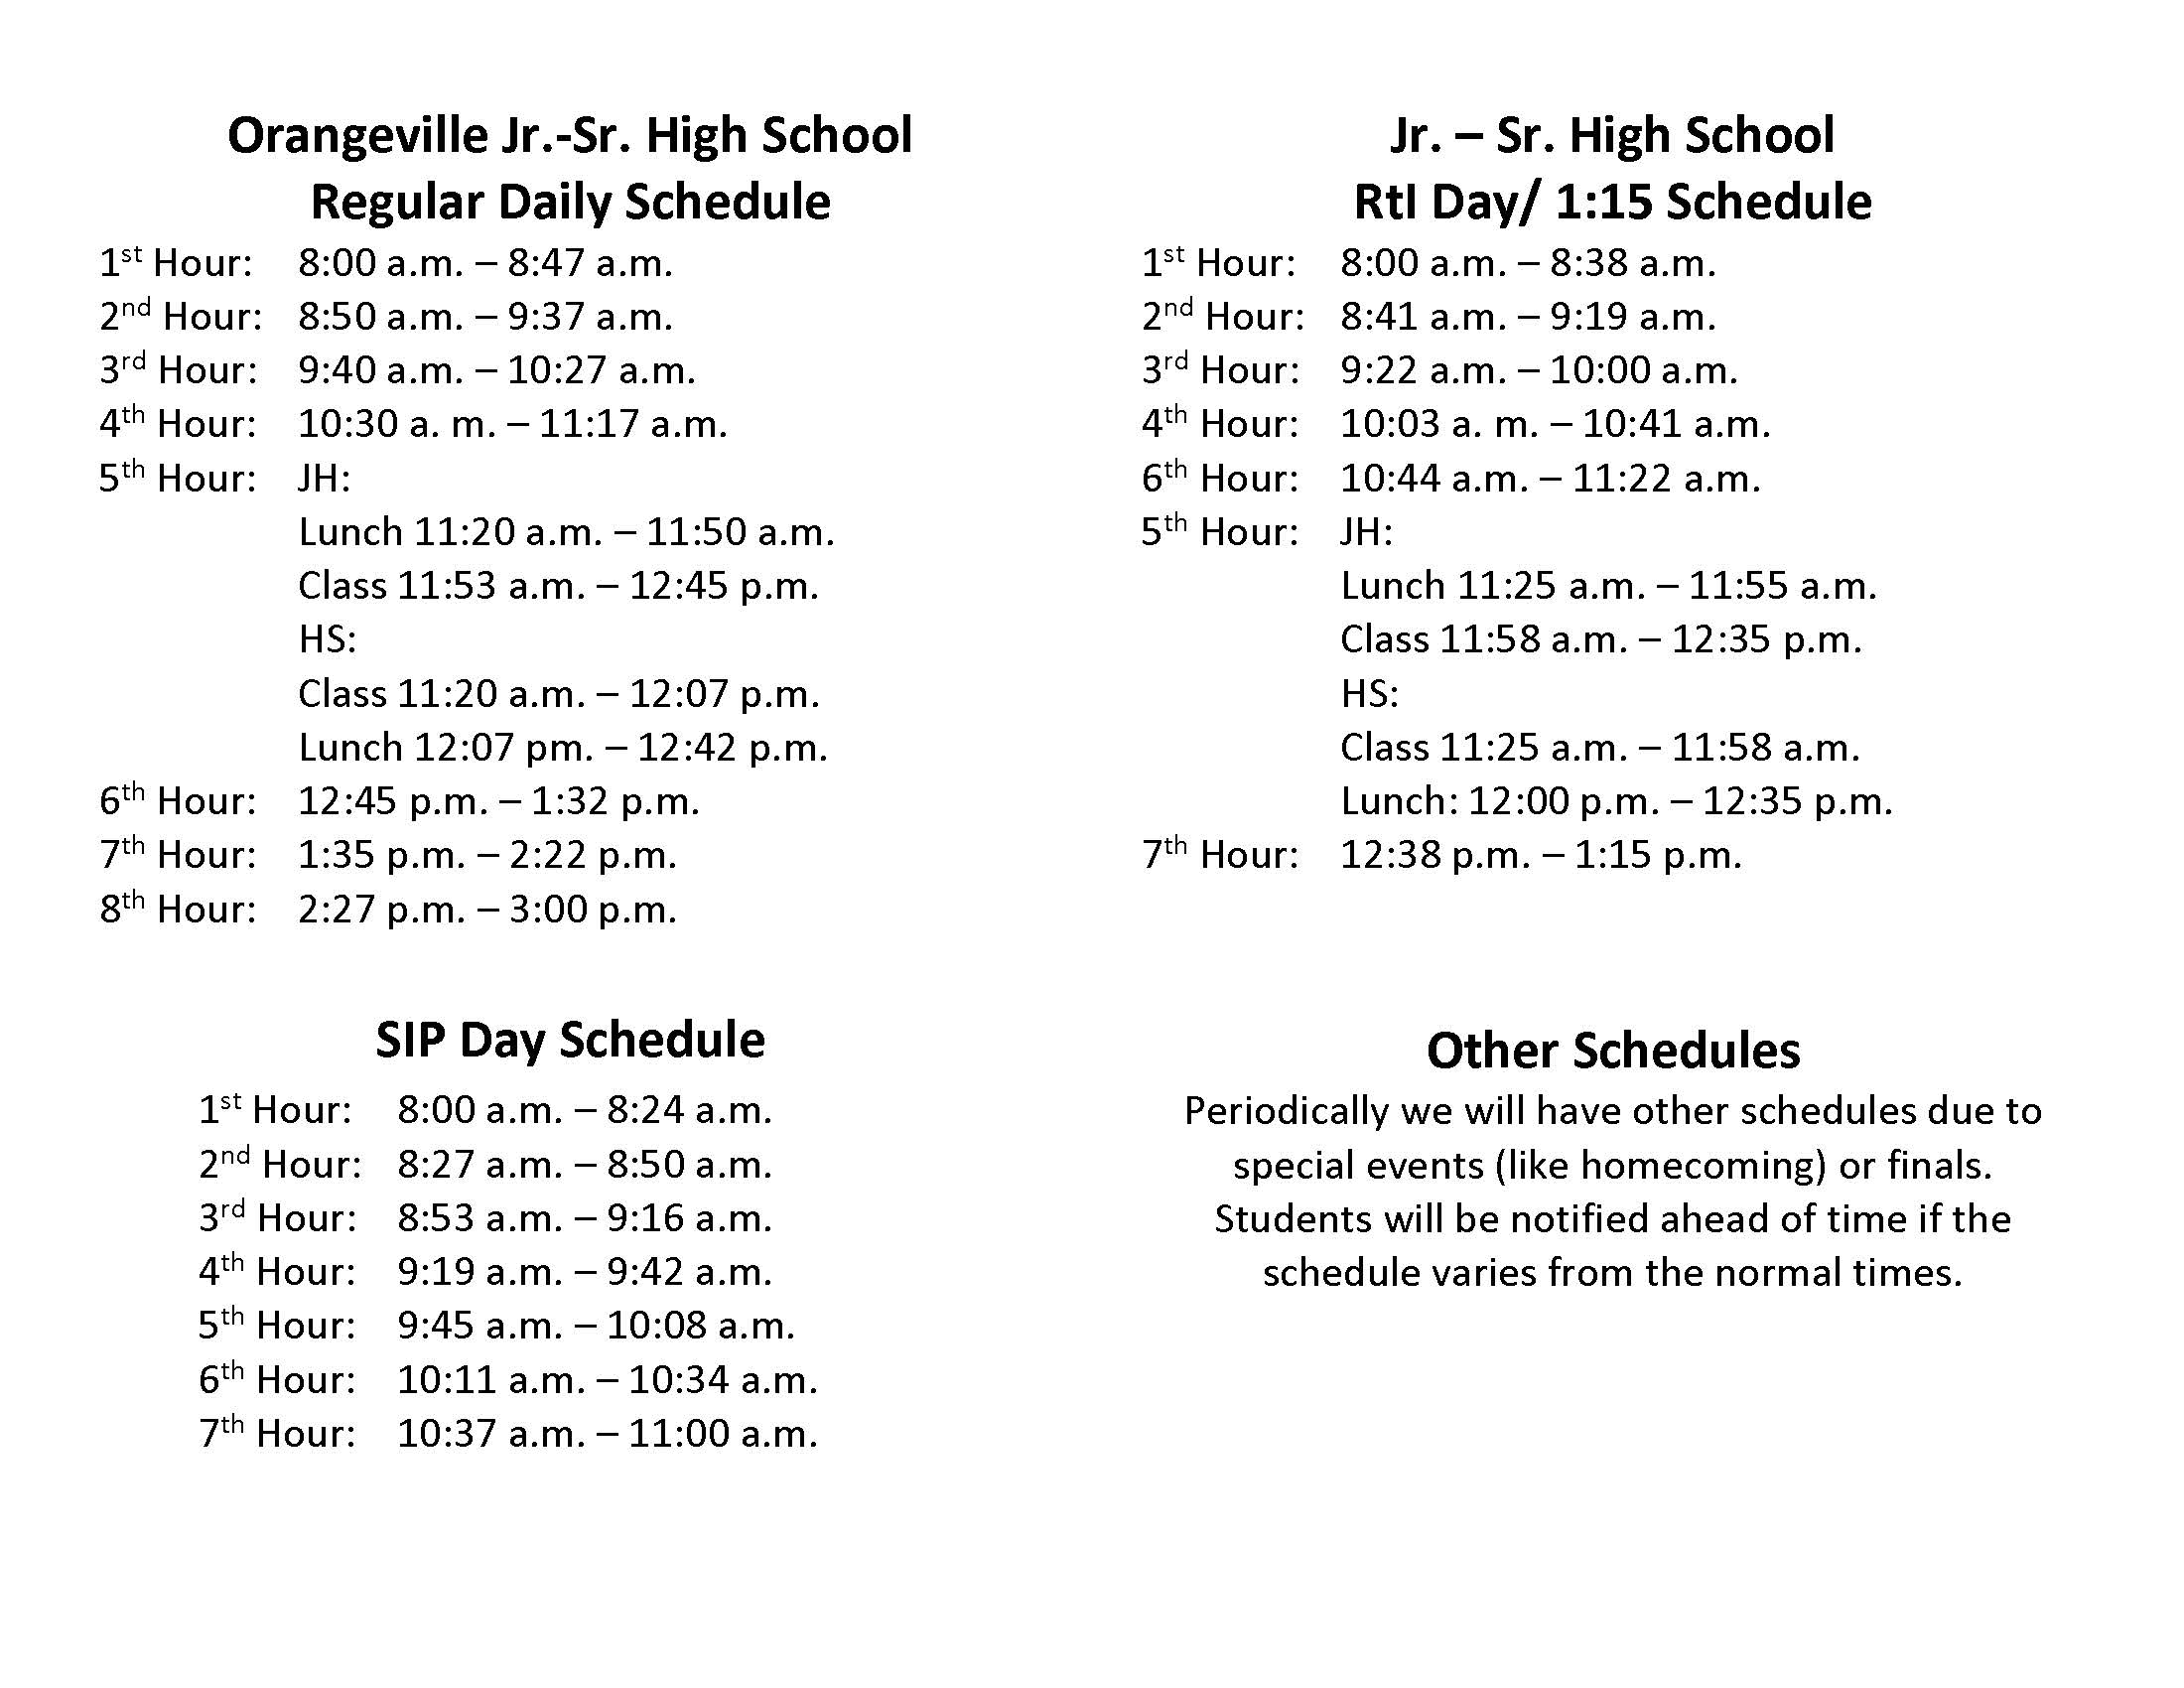 OHS daily schedules